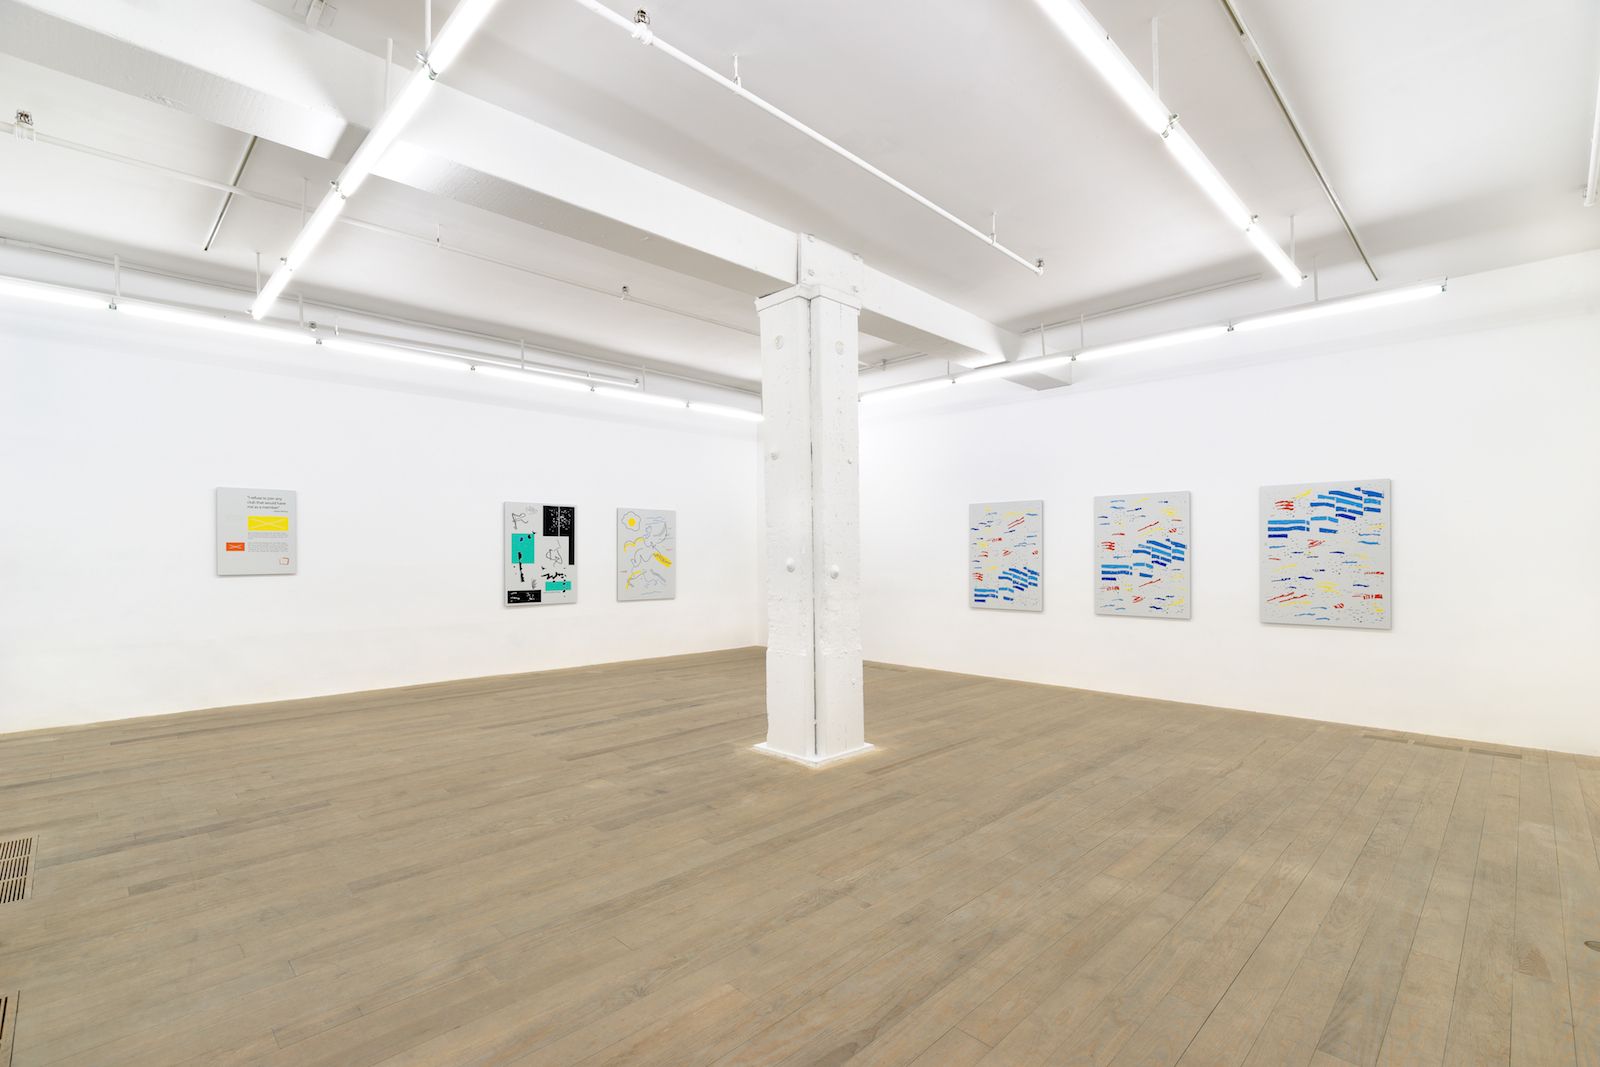 Michael Bell-Smith, 2014, installation view, Foxy Production, New York